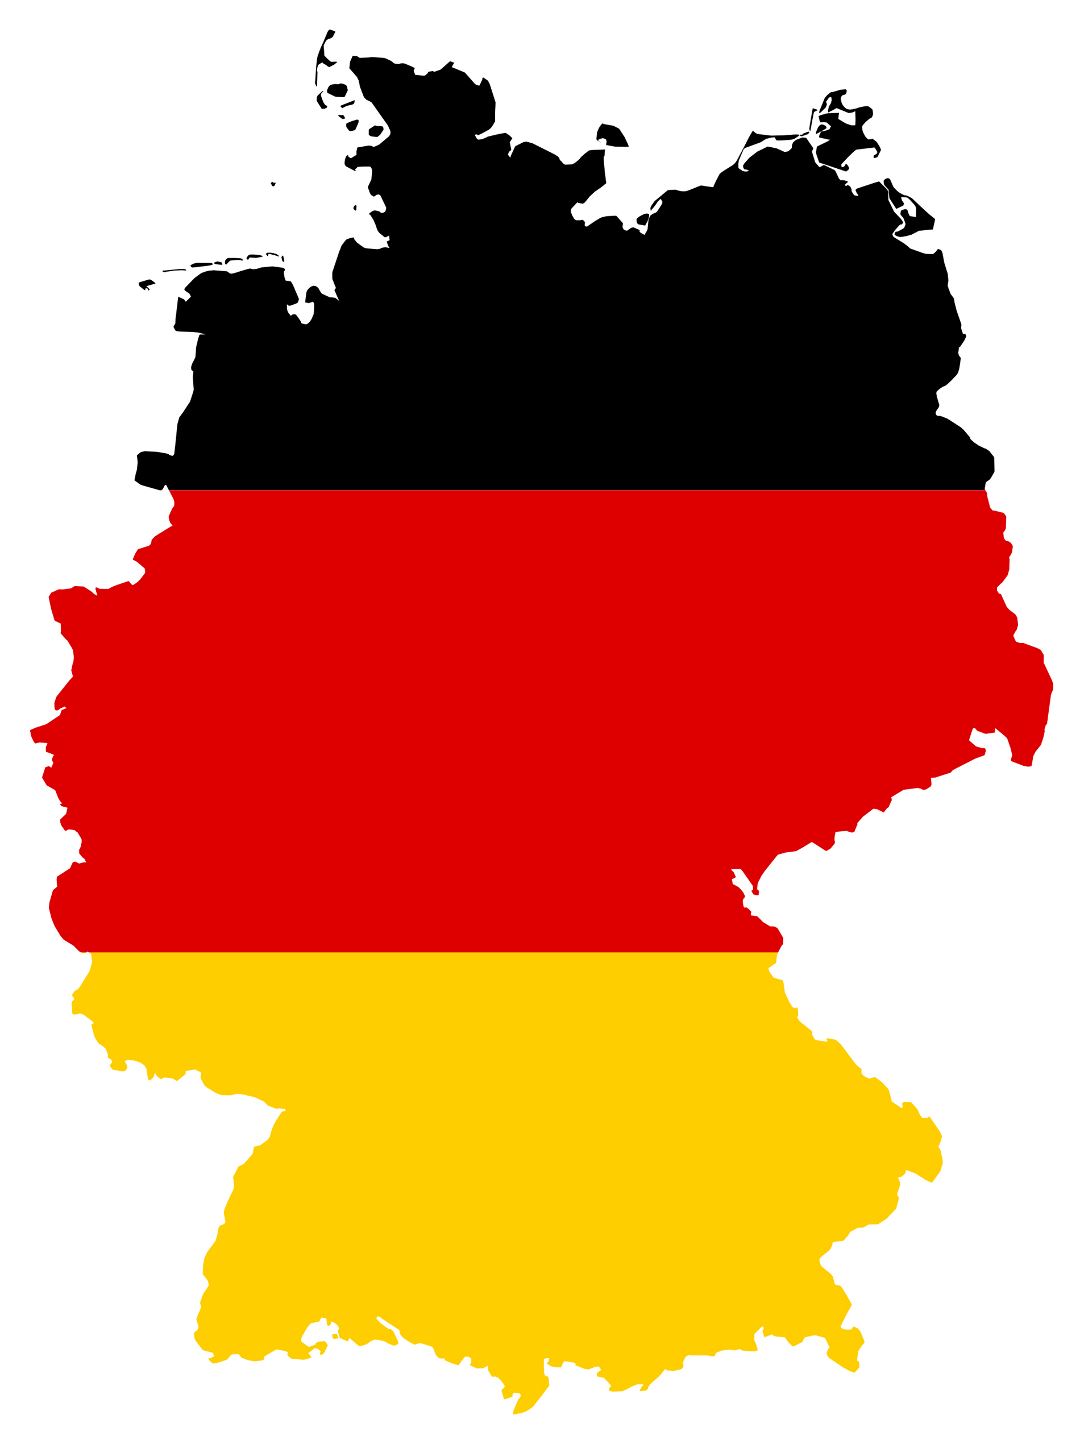 Large flag map of Germany